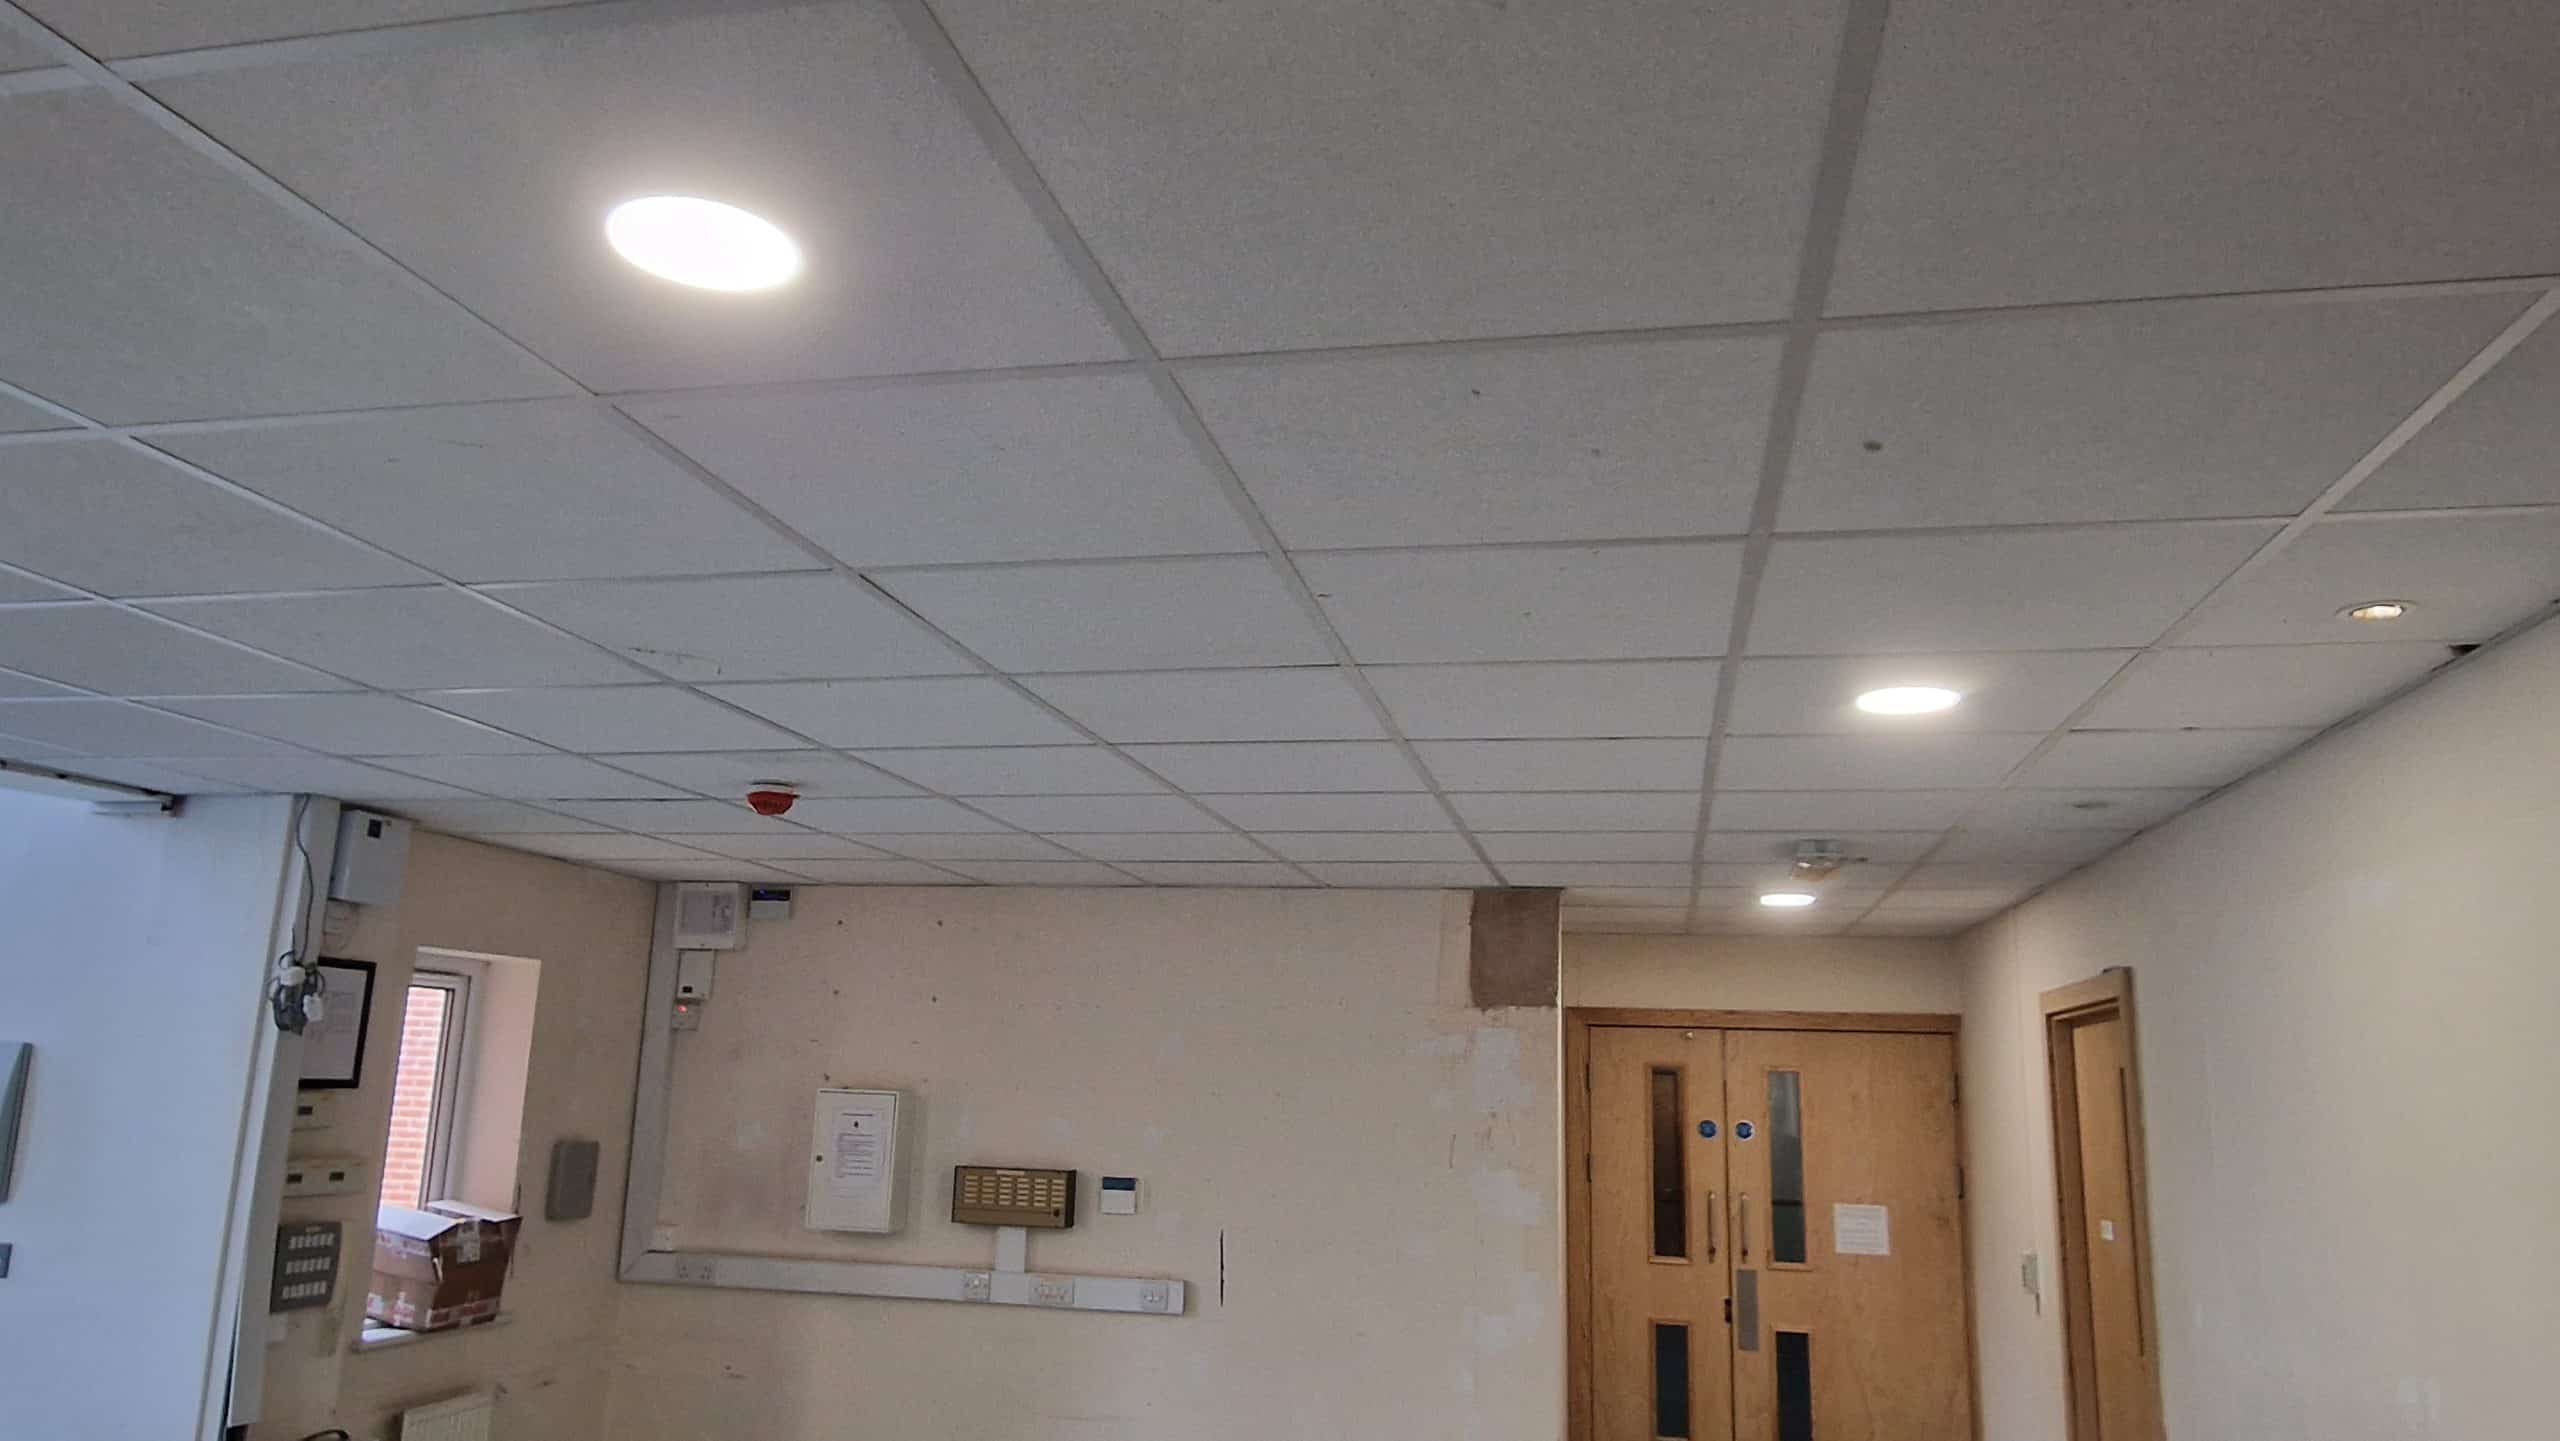 Suspended ceiling Install